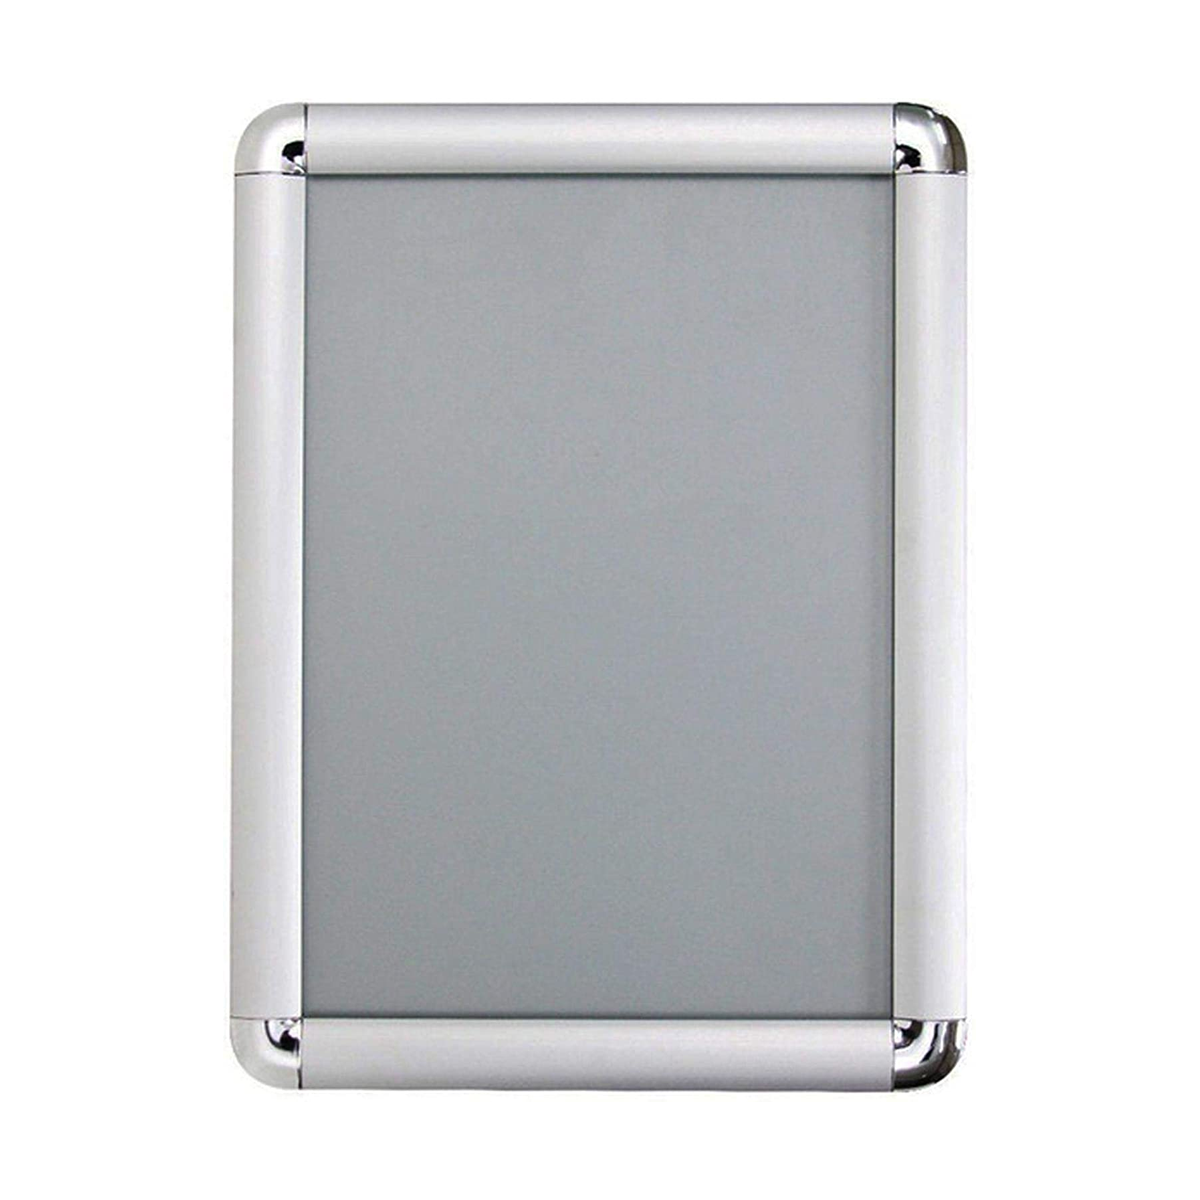 Olmecs Front Snap Frame Board with Chrome 30mm Profile Round Corner - Size A3